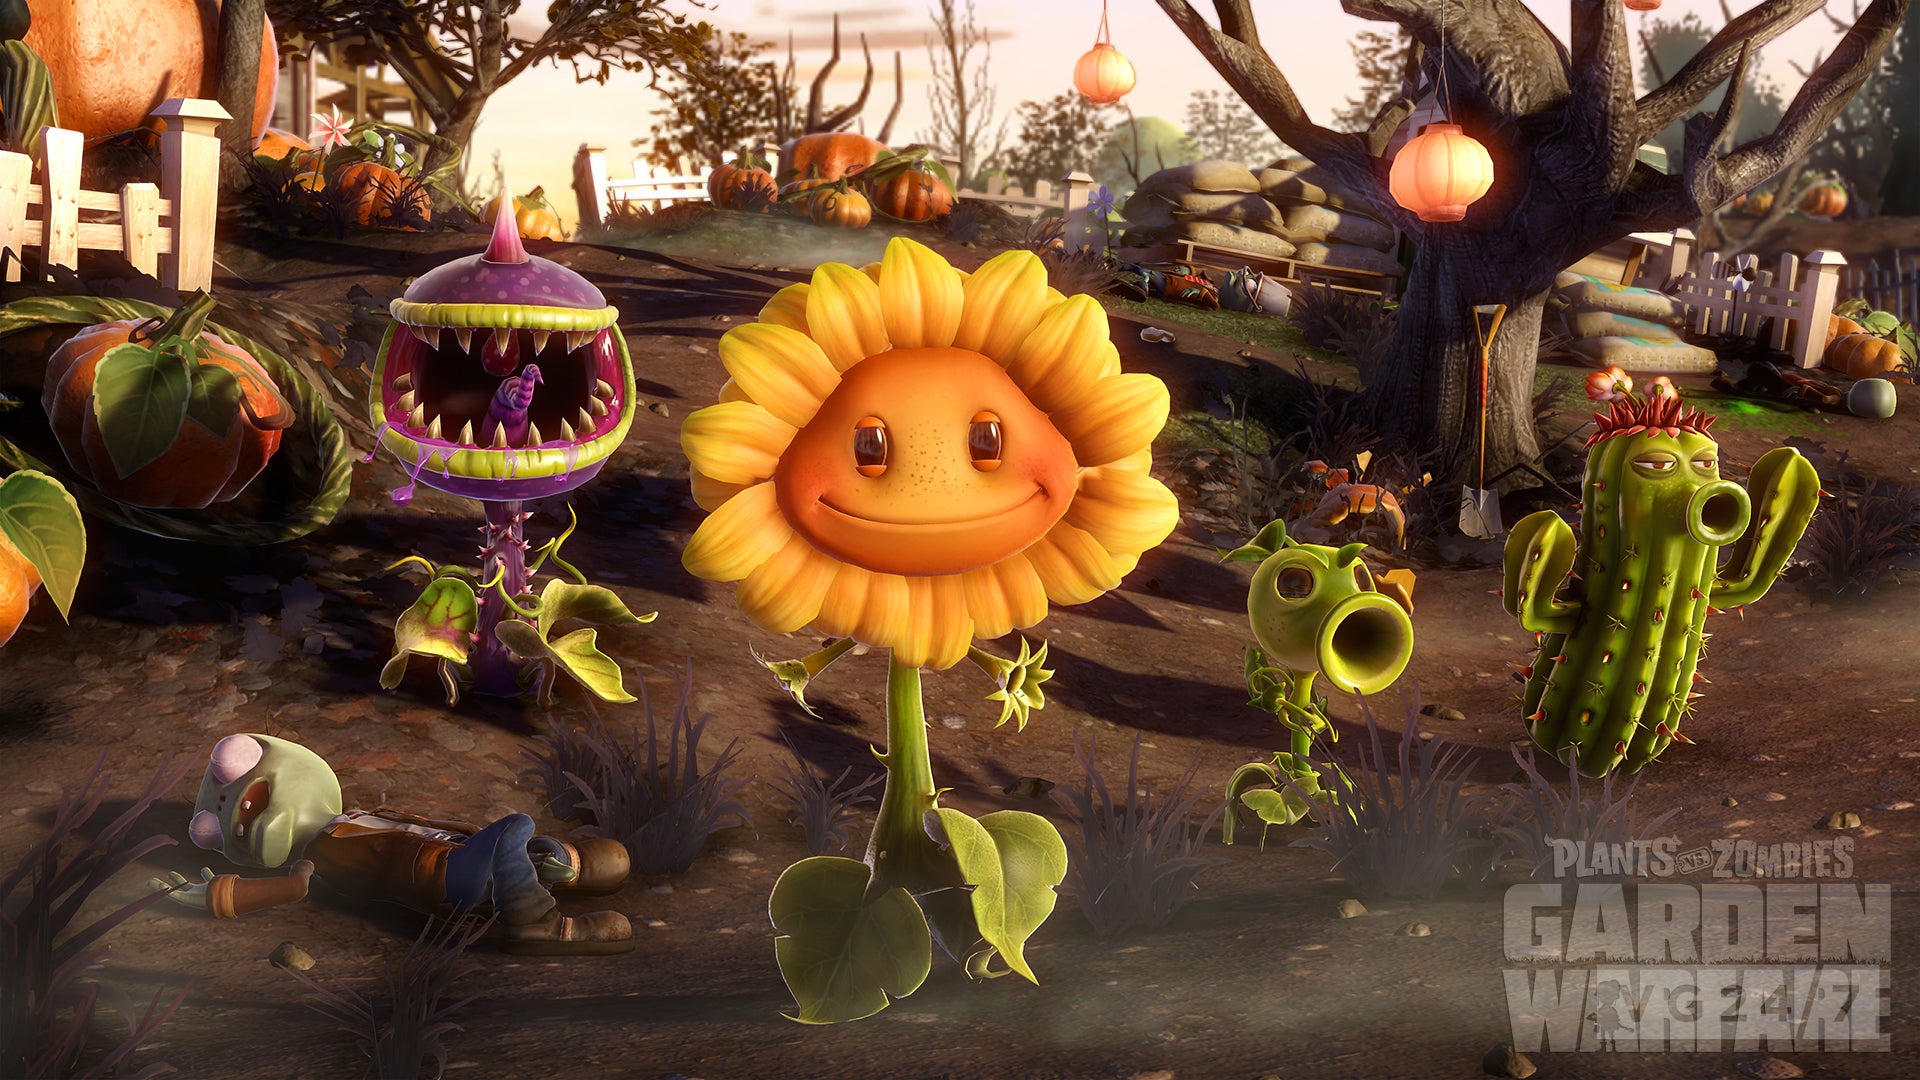 Image for Plants vs Zombies: Garden Warfare DLC will be free, says PopCap's Clay